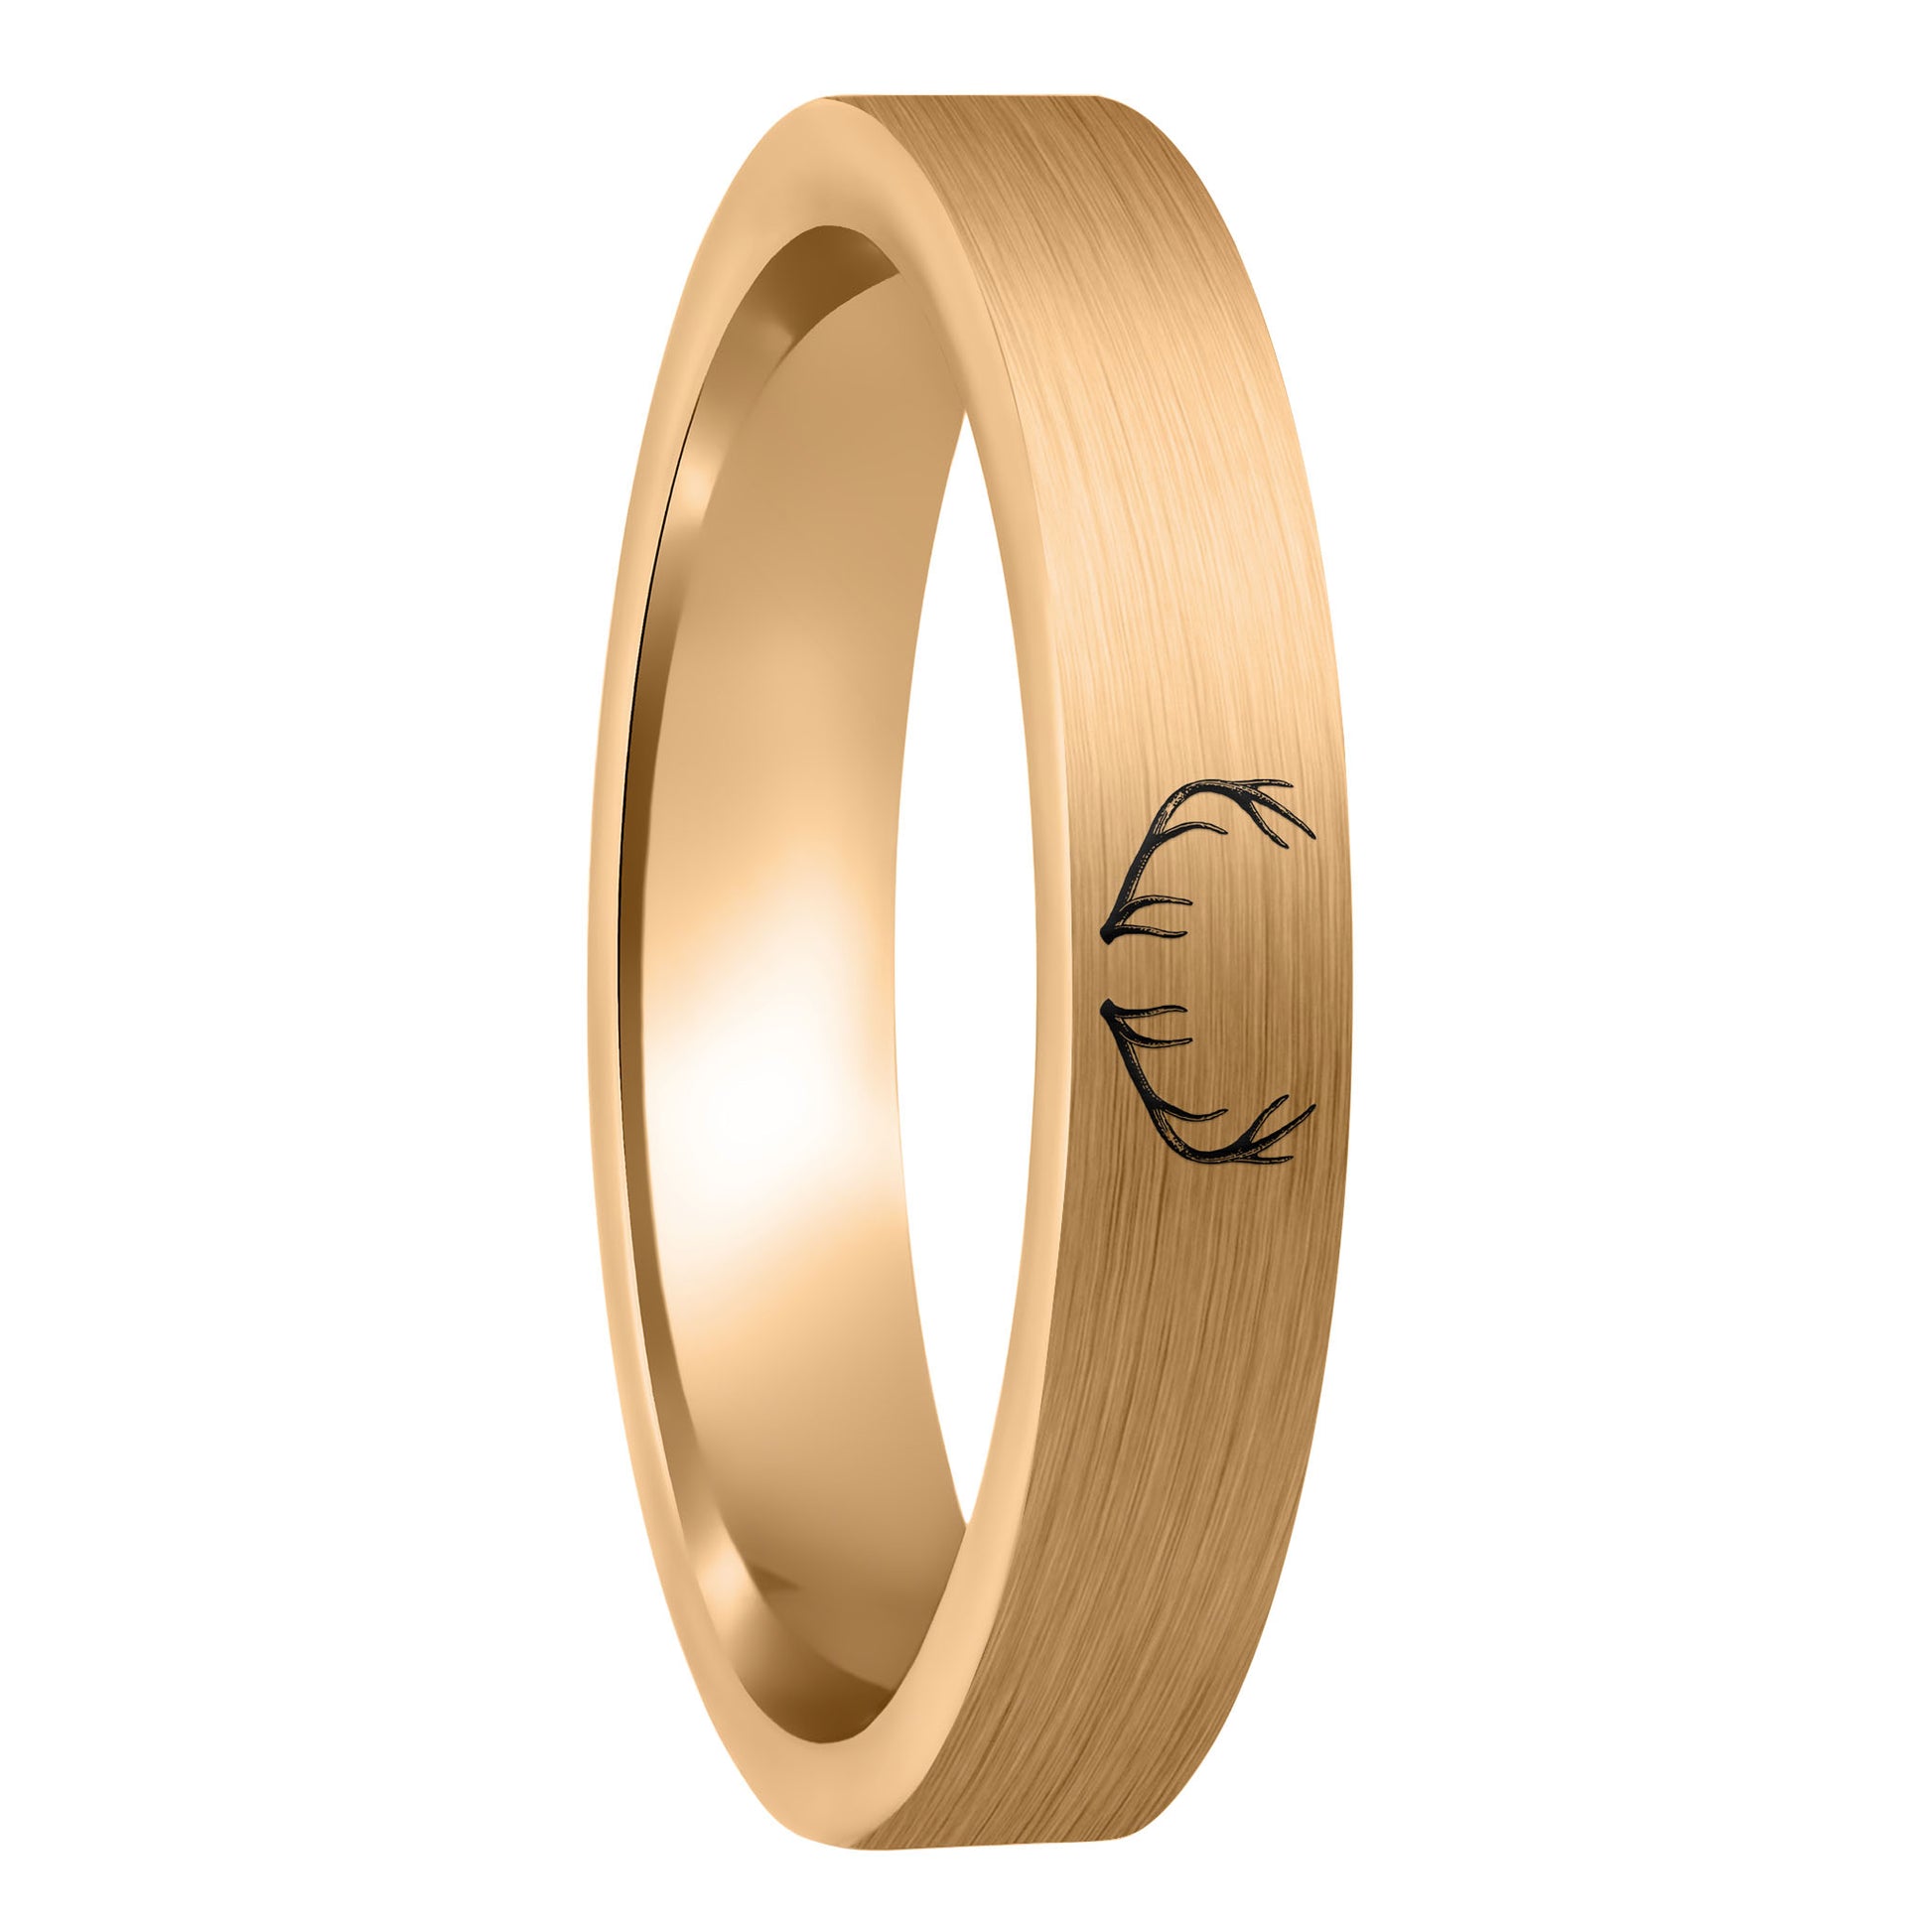 A antler engraved brushed rose gold tungsten women's wedding band displayed on a plain white background.